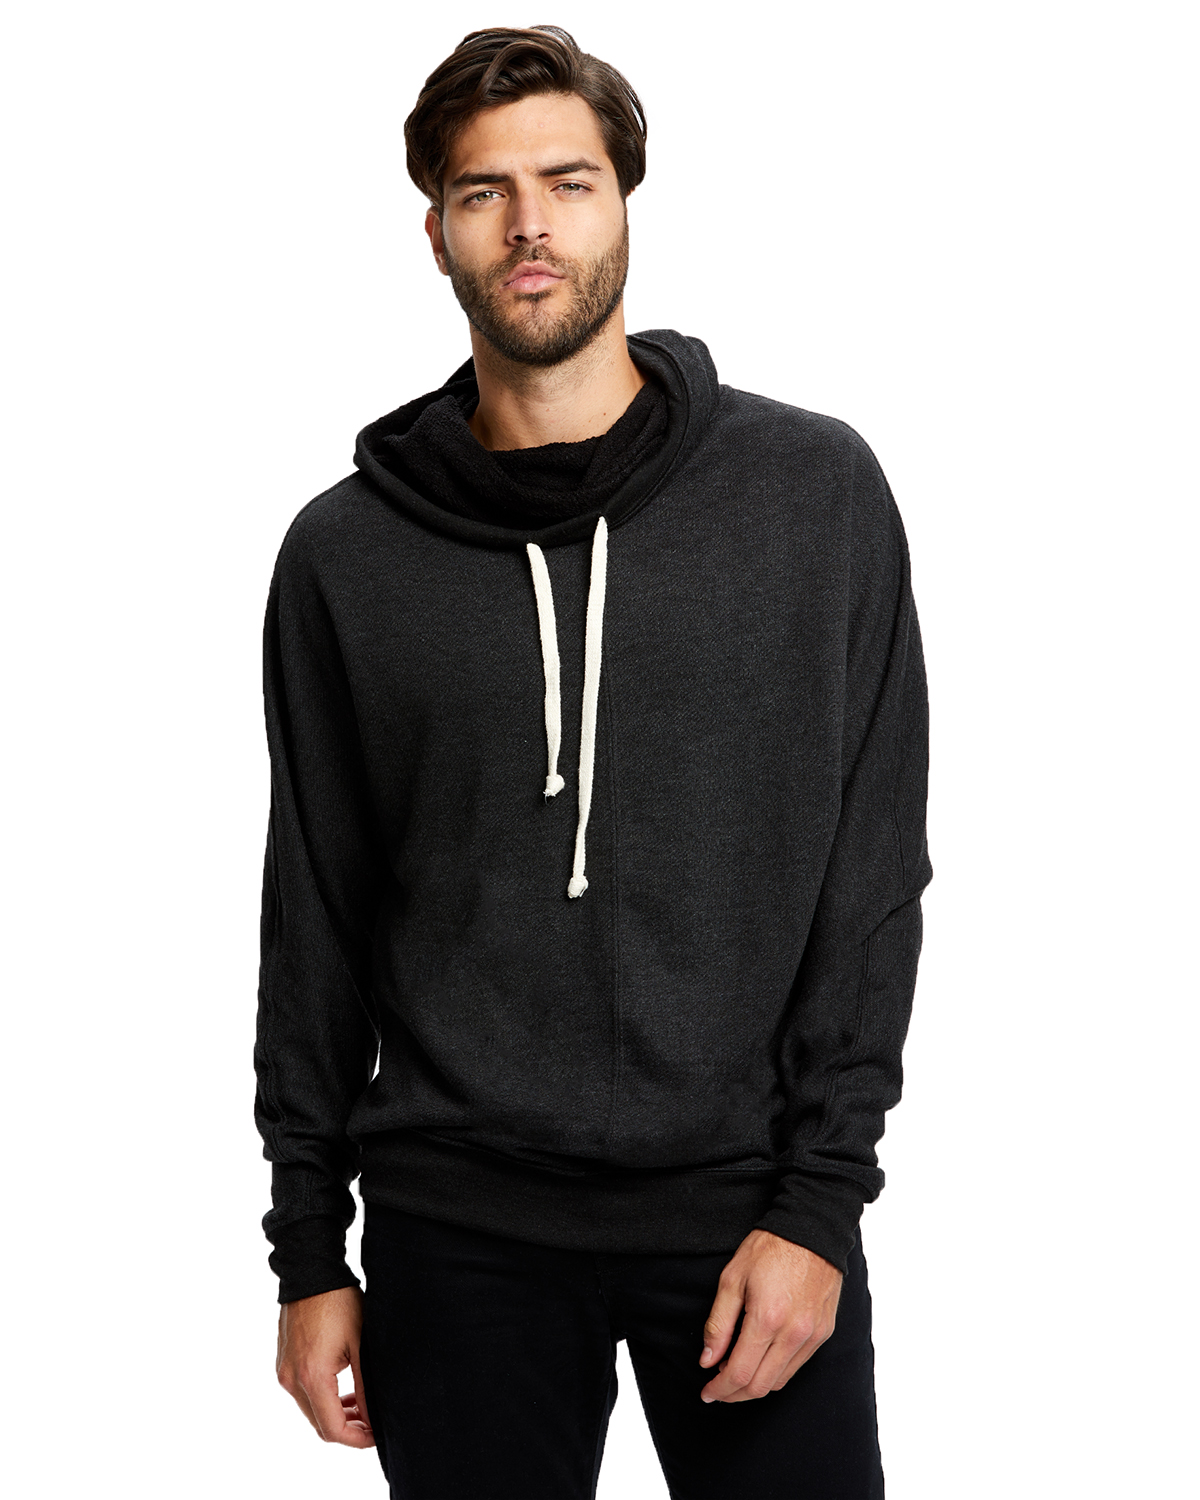 'US Blanks US897 French Terry Snorkel Pullover Sweatshirt'